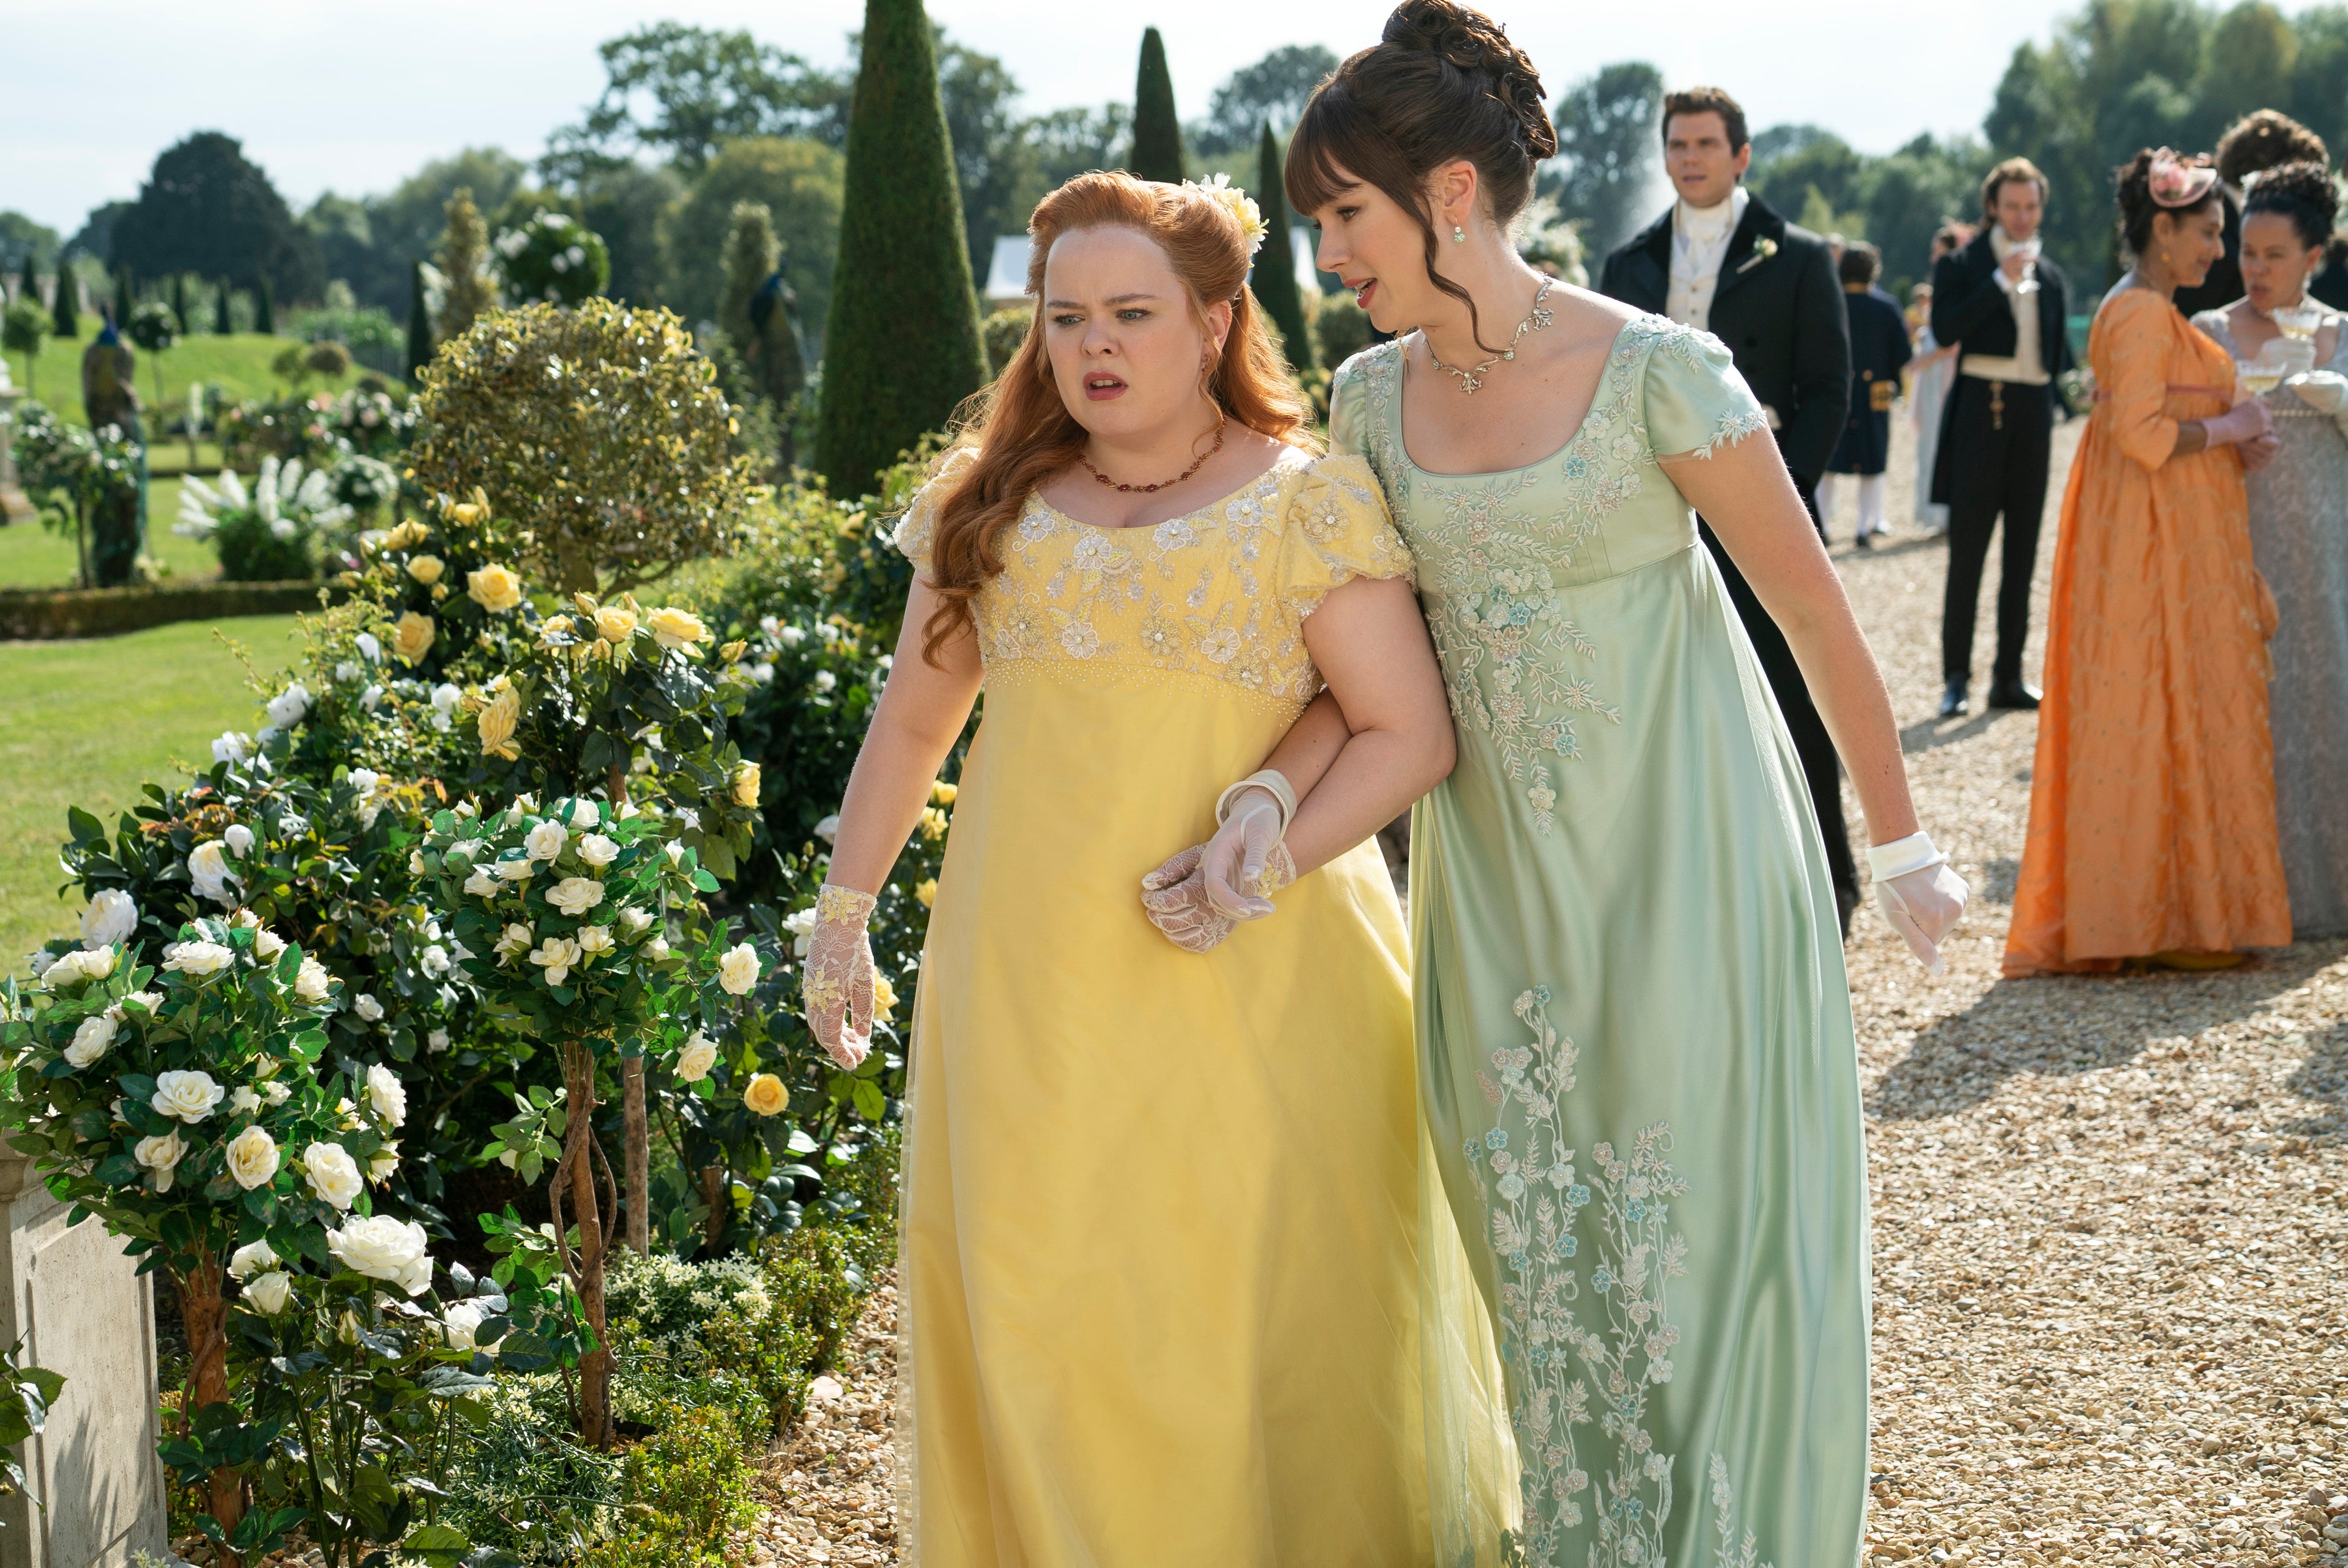 Penelope Featherington (Nicola Coughlan) and Eloise (Claudia Jessie) strolling through the garden in wispy dresses